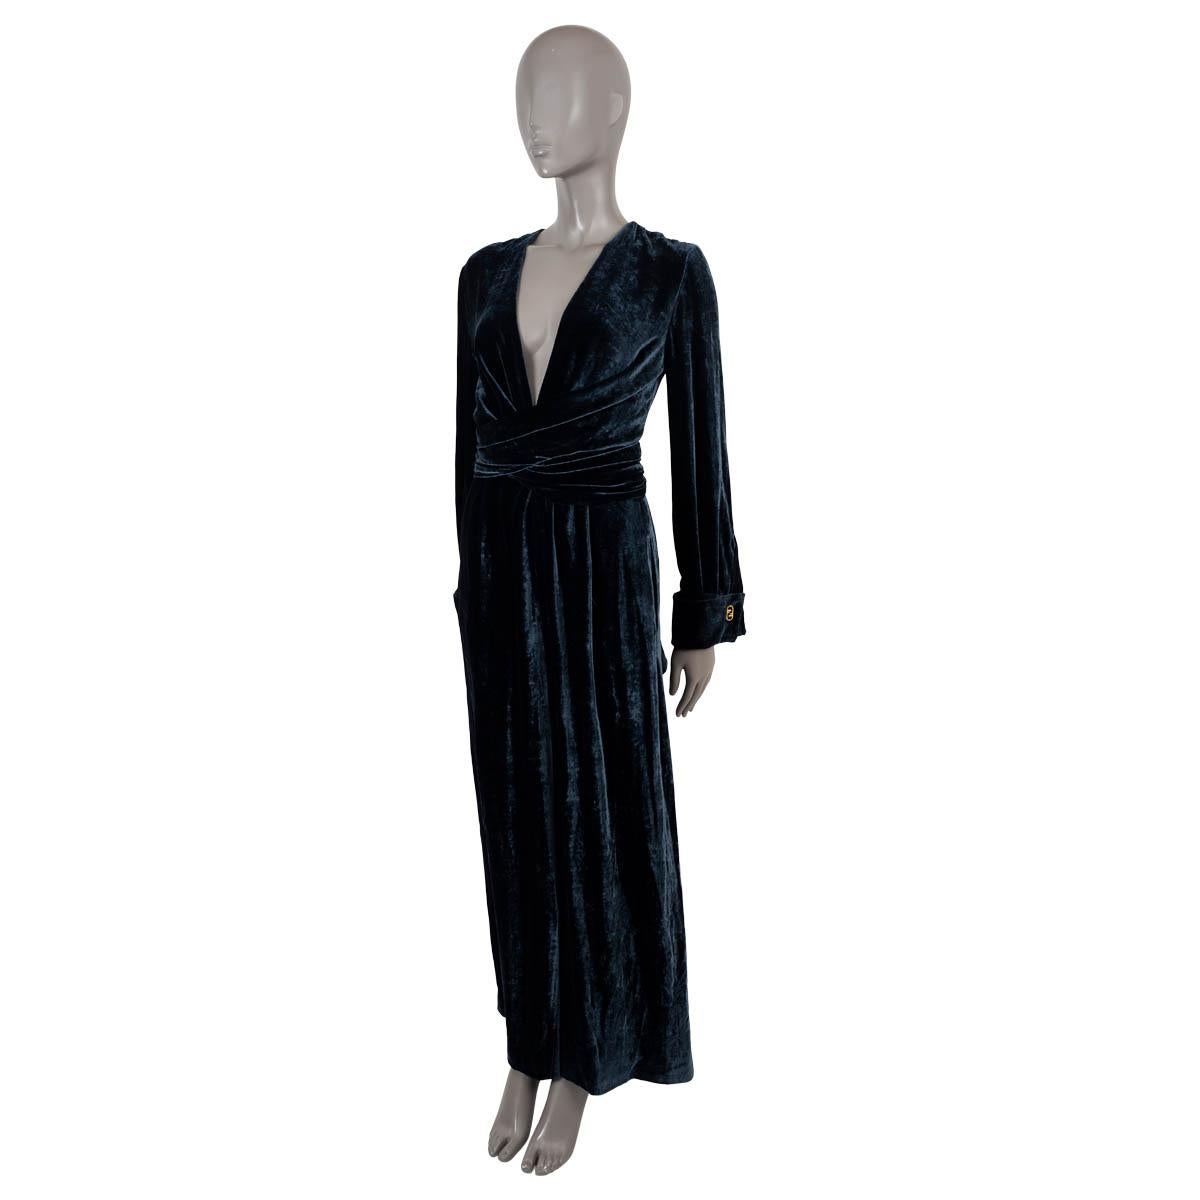 100% authentic Fendi velvet jumpsuit in midnight blue viscose (80%) and silk (20%). Features a V neck, wide-leg pants, wide cuffs with gold-tone O'Lock cufflinks,slit pockets and a self-tie belt. Opens with a concealed zipper in the back and is in